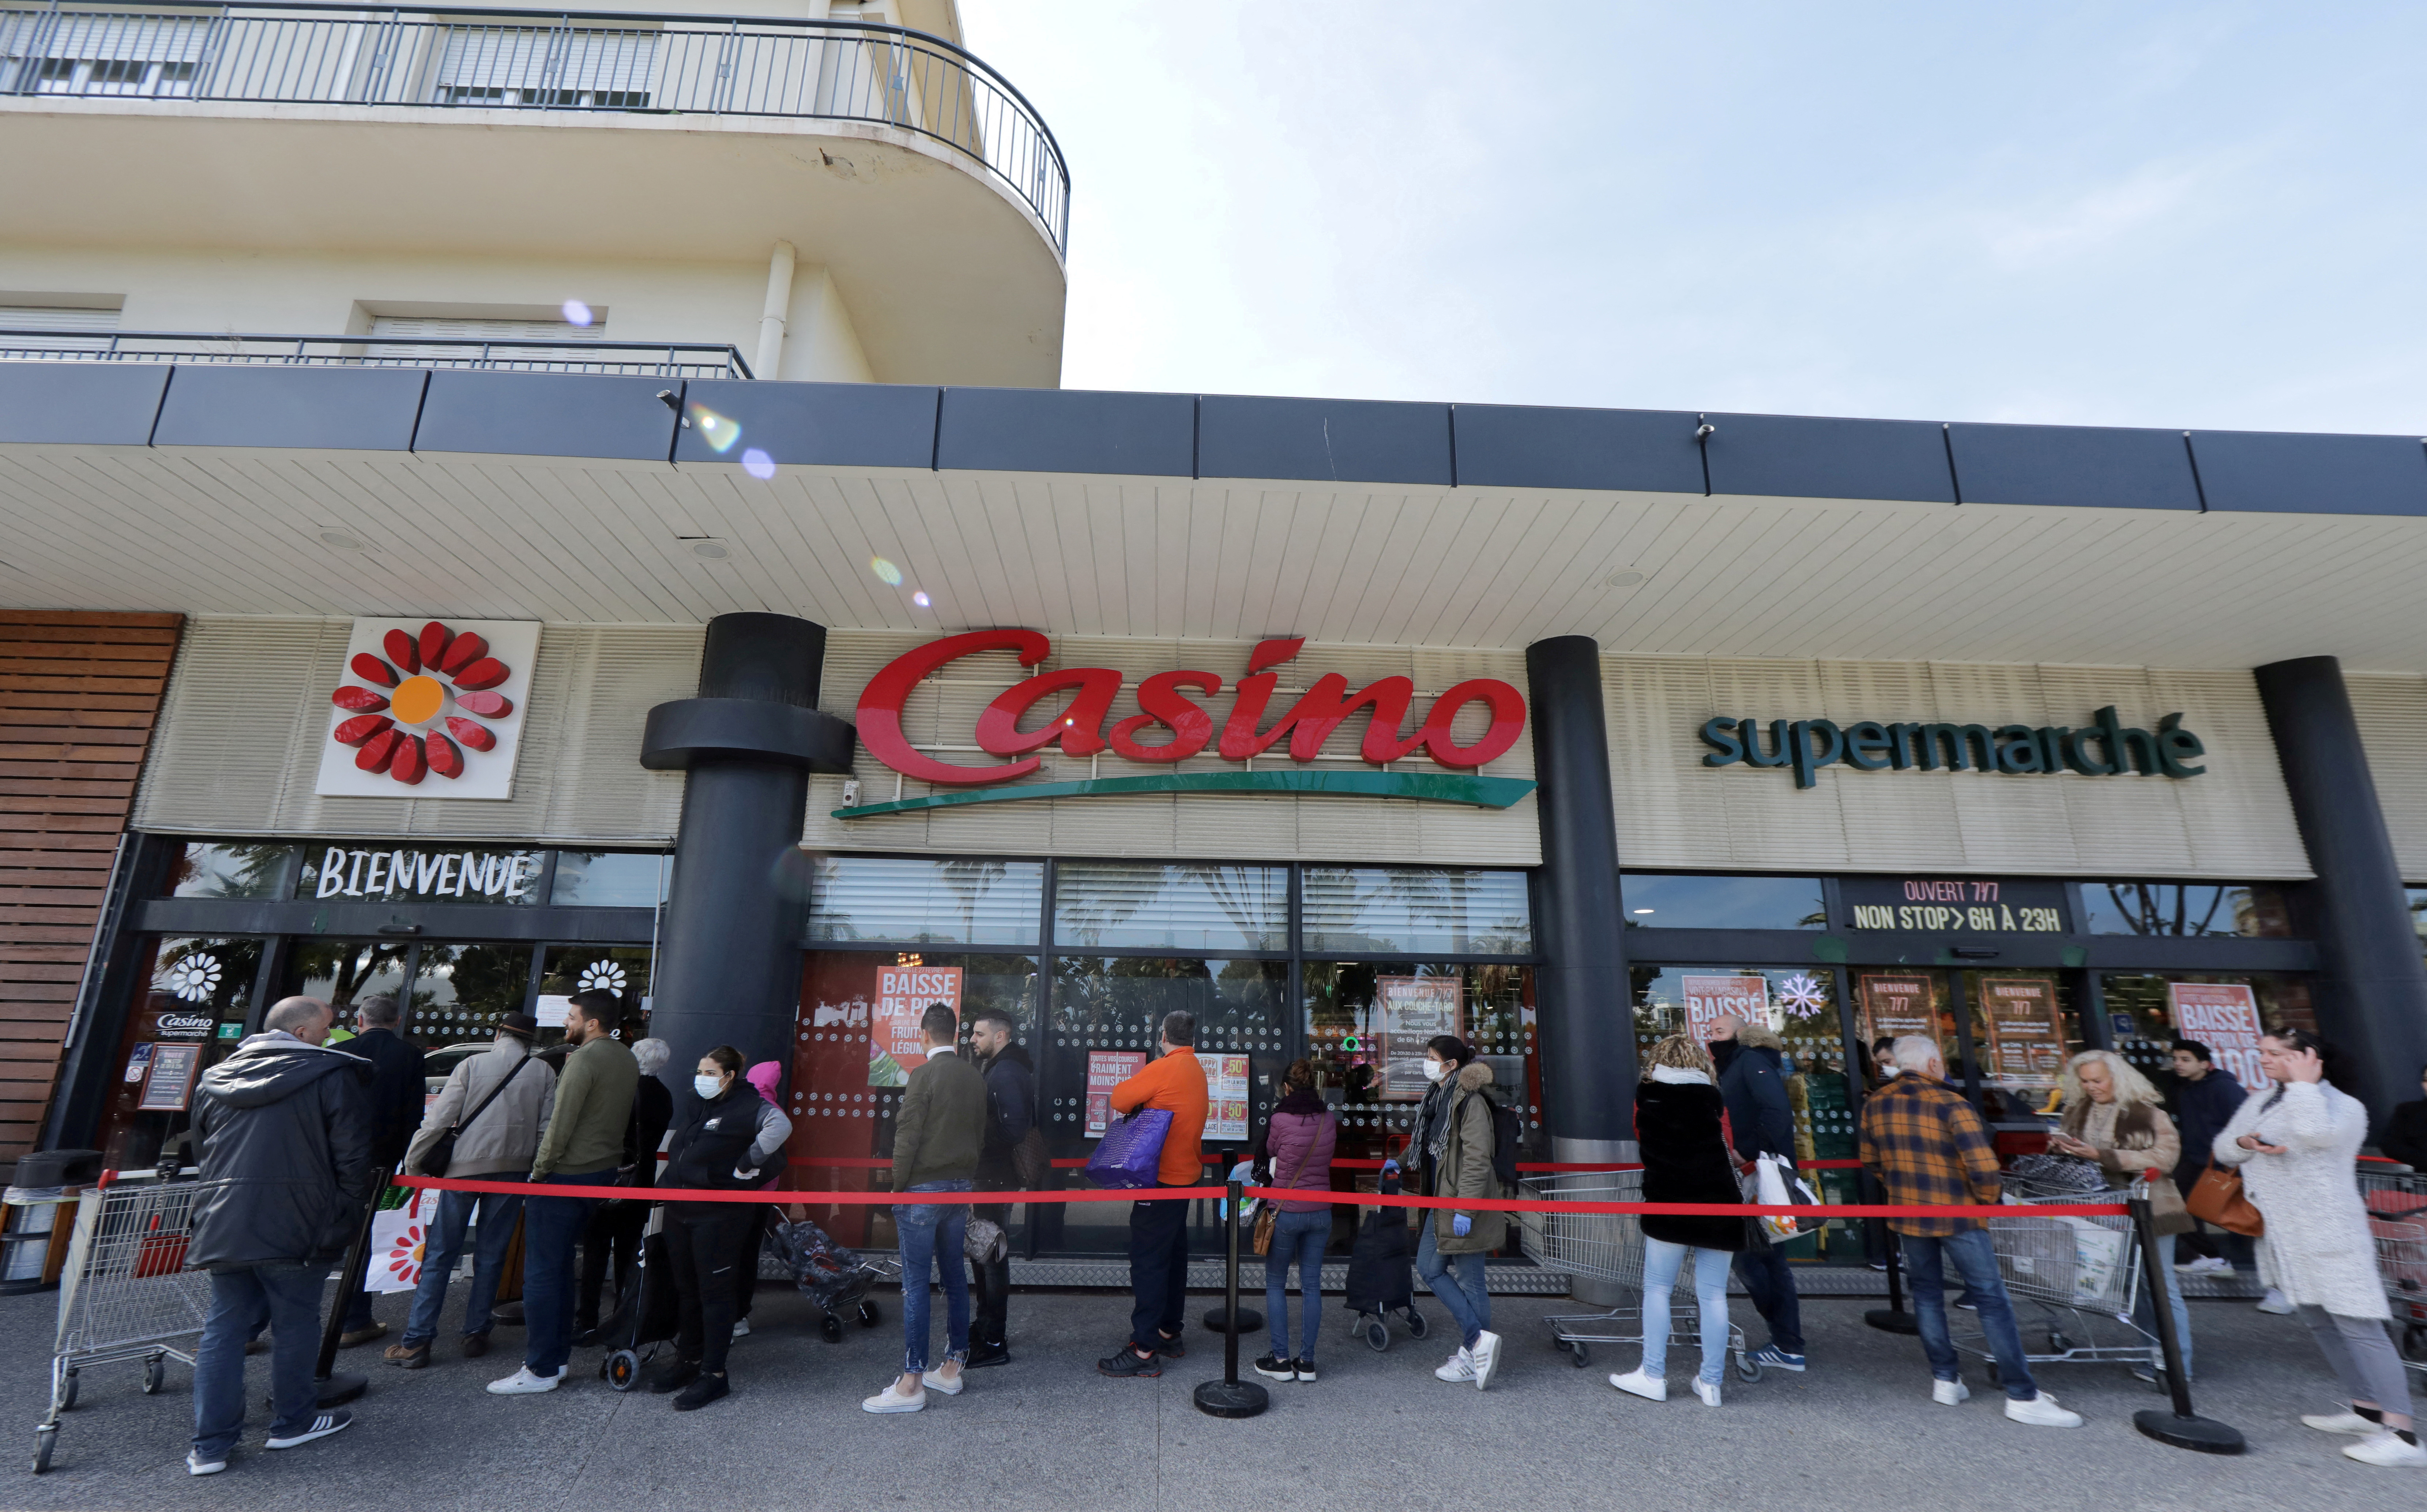 People queue to enter a Casino supermarket in Nice